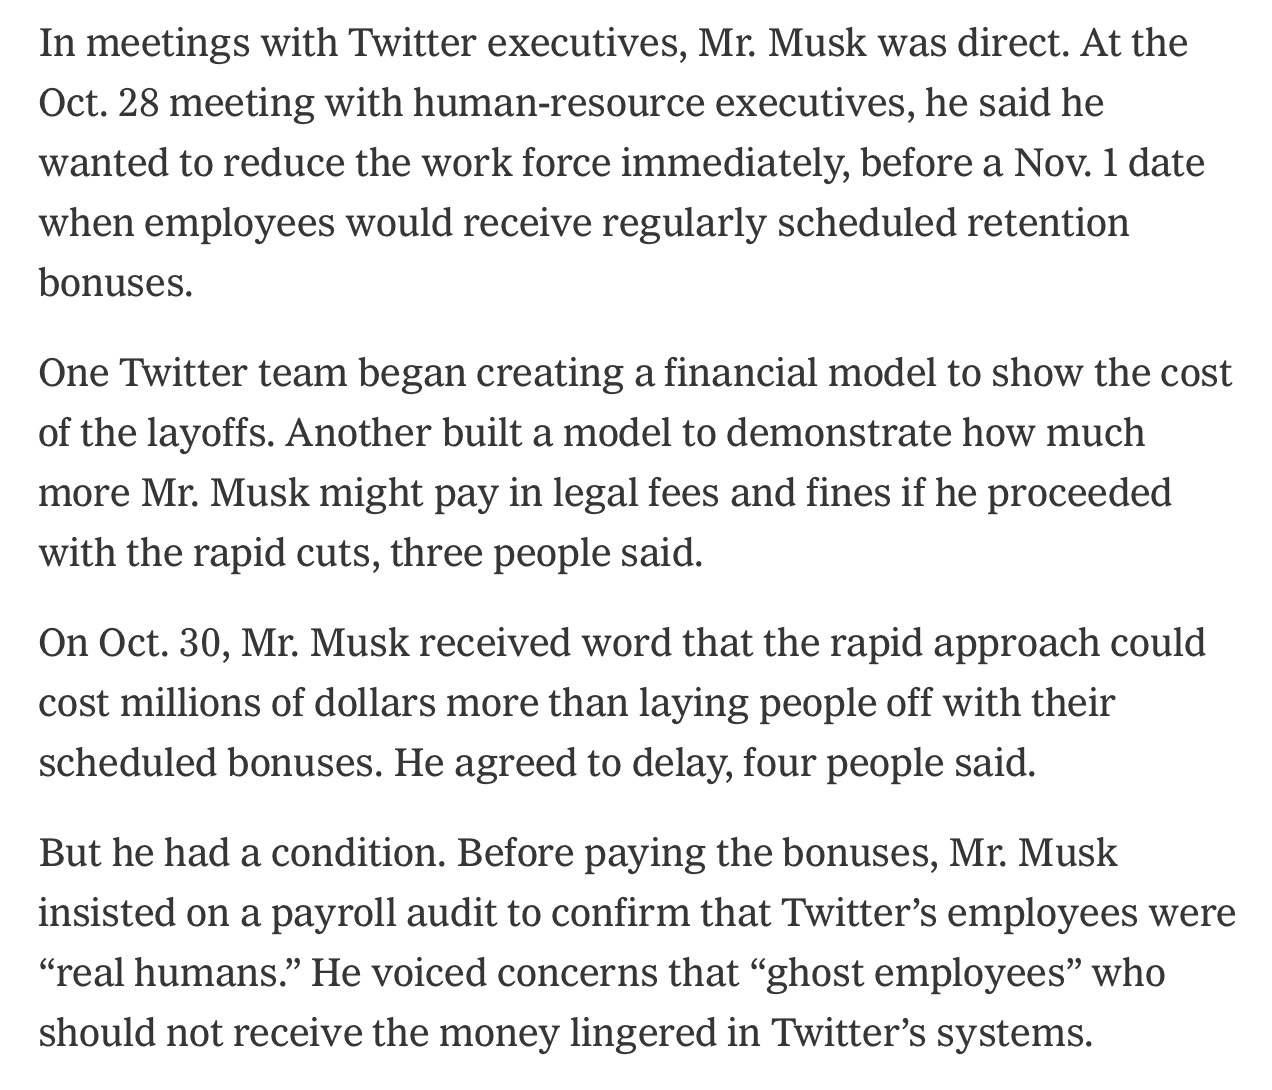 In meetings with Twitter executives, Mr. Musk was direct. At the Oct. 28 meeting with human-resource executives, he said he wanted to reduce the work force immediately, before a Nov. 1 date when employees would receive regularly scheduled retention bonuses.

One Twitter team began creating a financial model to show the cost of the layoffs. Another built a model to demonstrate how much more Mr. Musk might pay in legal fees and fines if he proceeded with the rapid cuts, three people said.

On Oct. 30, Mr. Musk received word that the rapid approach could cost millions of dollars more than laying people off with their scheduled bonuses. He agreed to delay, four people said.

But he had a condition. Before paying the bonuses, Mr. Musk insisted on a payroll audit to confirm that Twitter’s employees were “real humans.” He voiced concerns that “ghost employees” who should not receive the money lingered in Twitter’s systems.